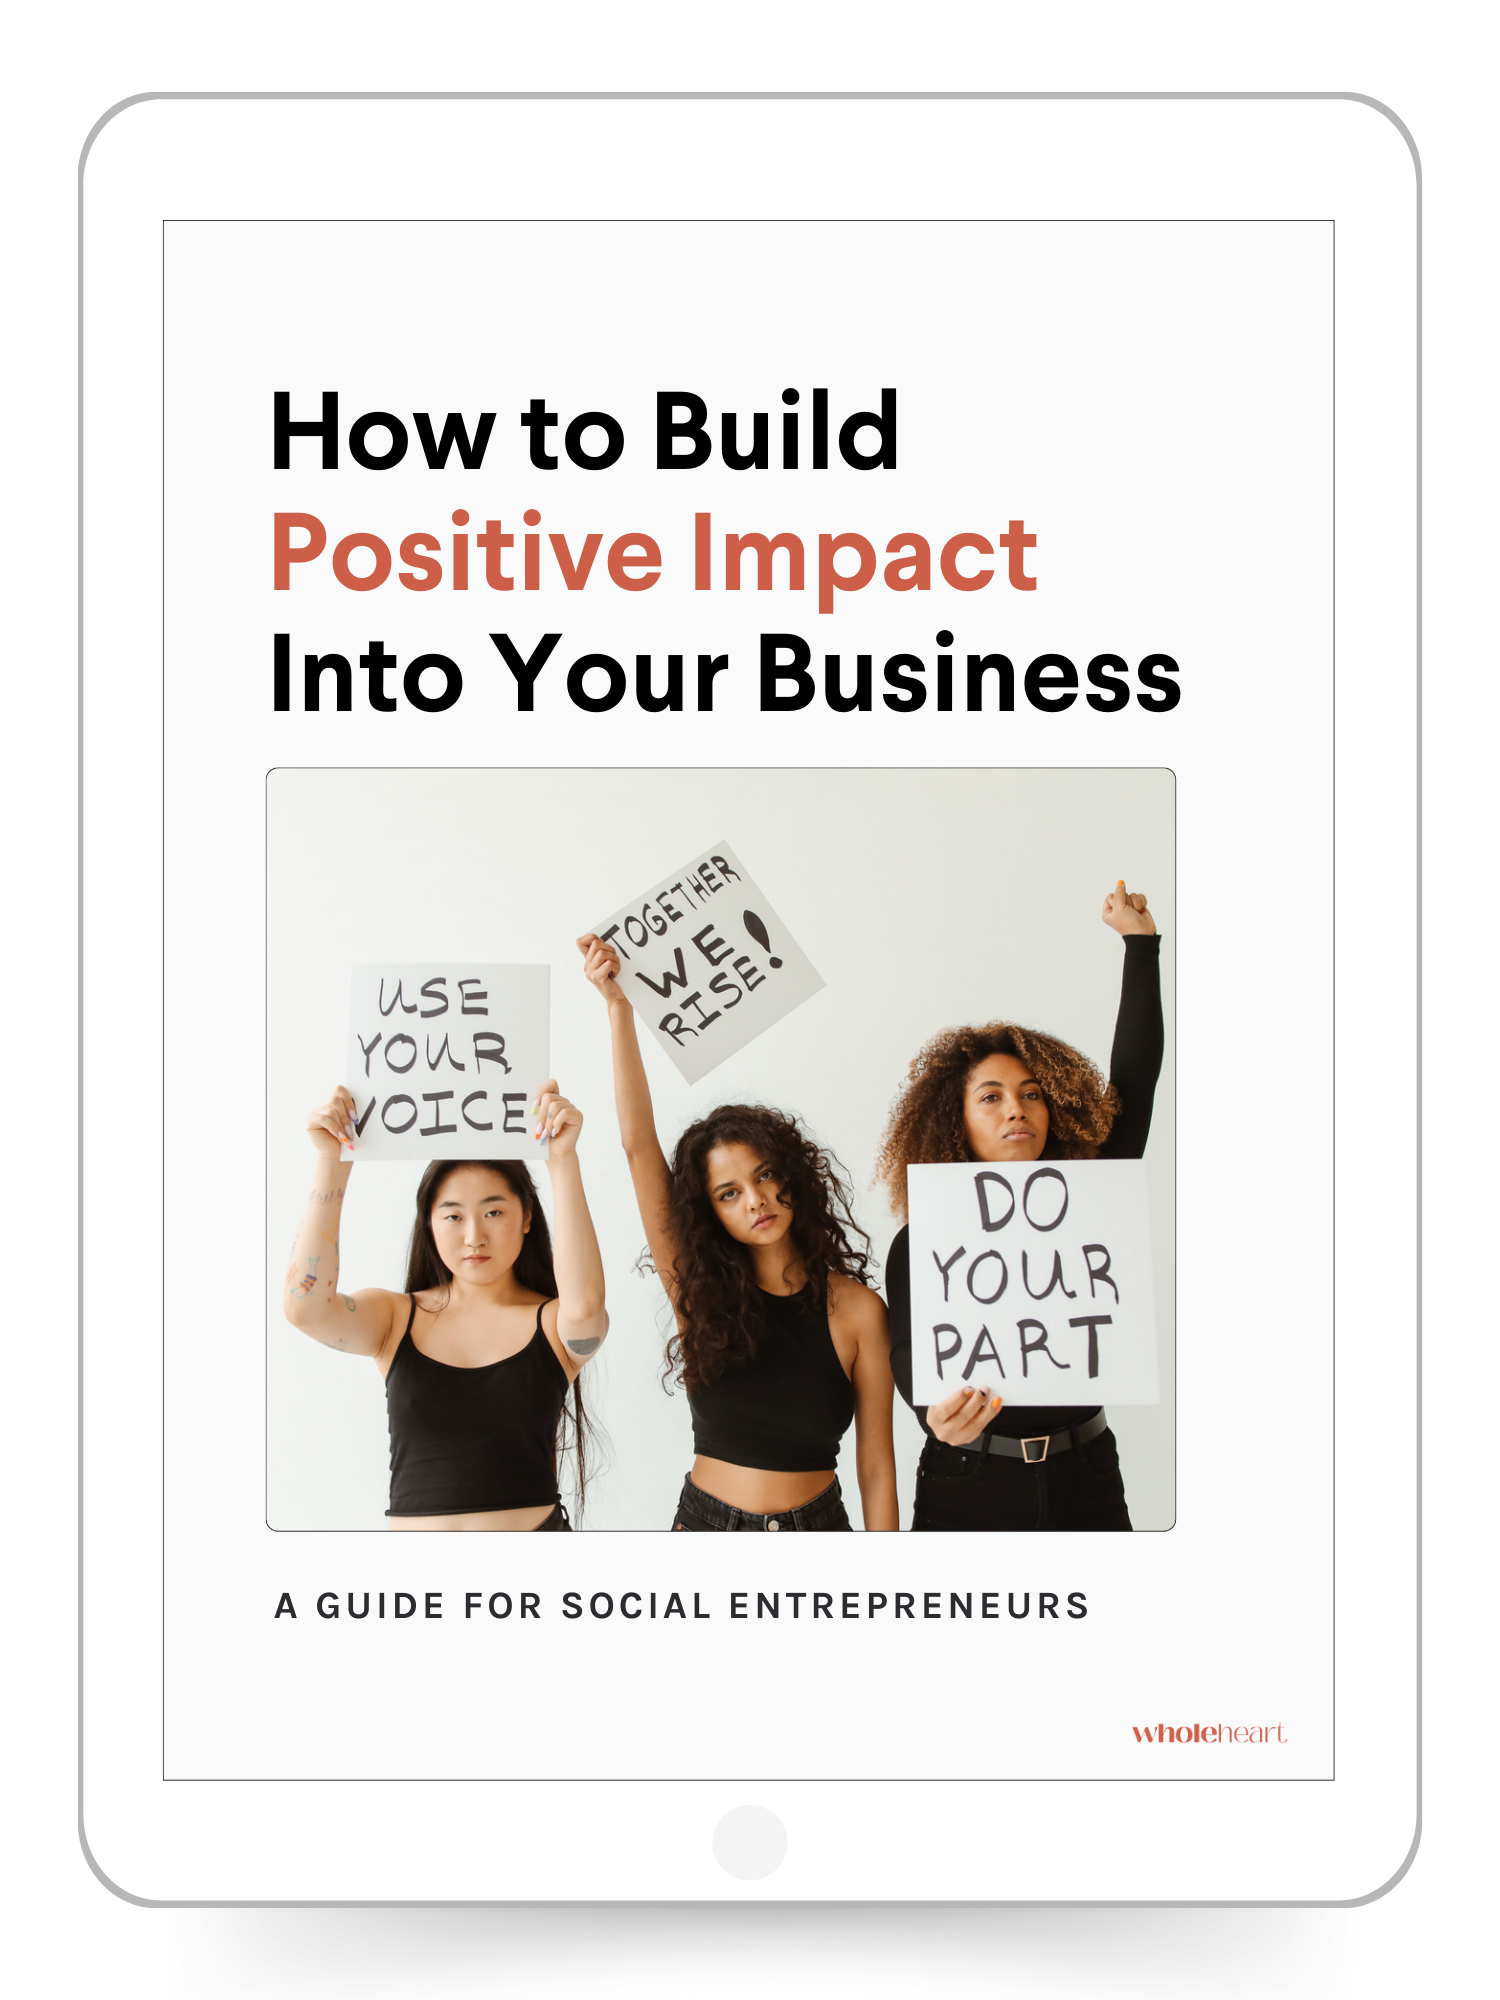 How to build positive impact into your business free guide download device ipad mockup